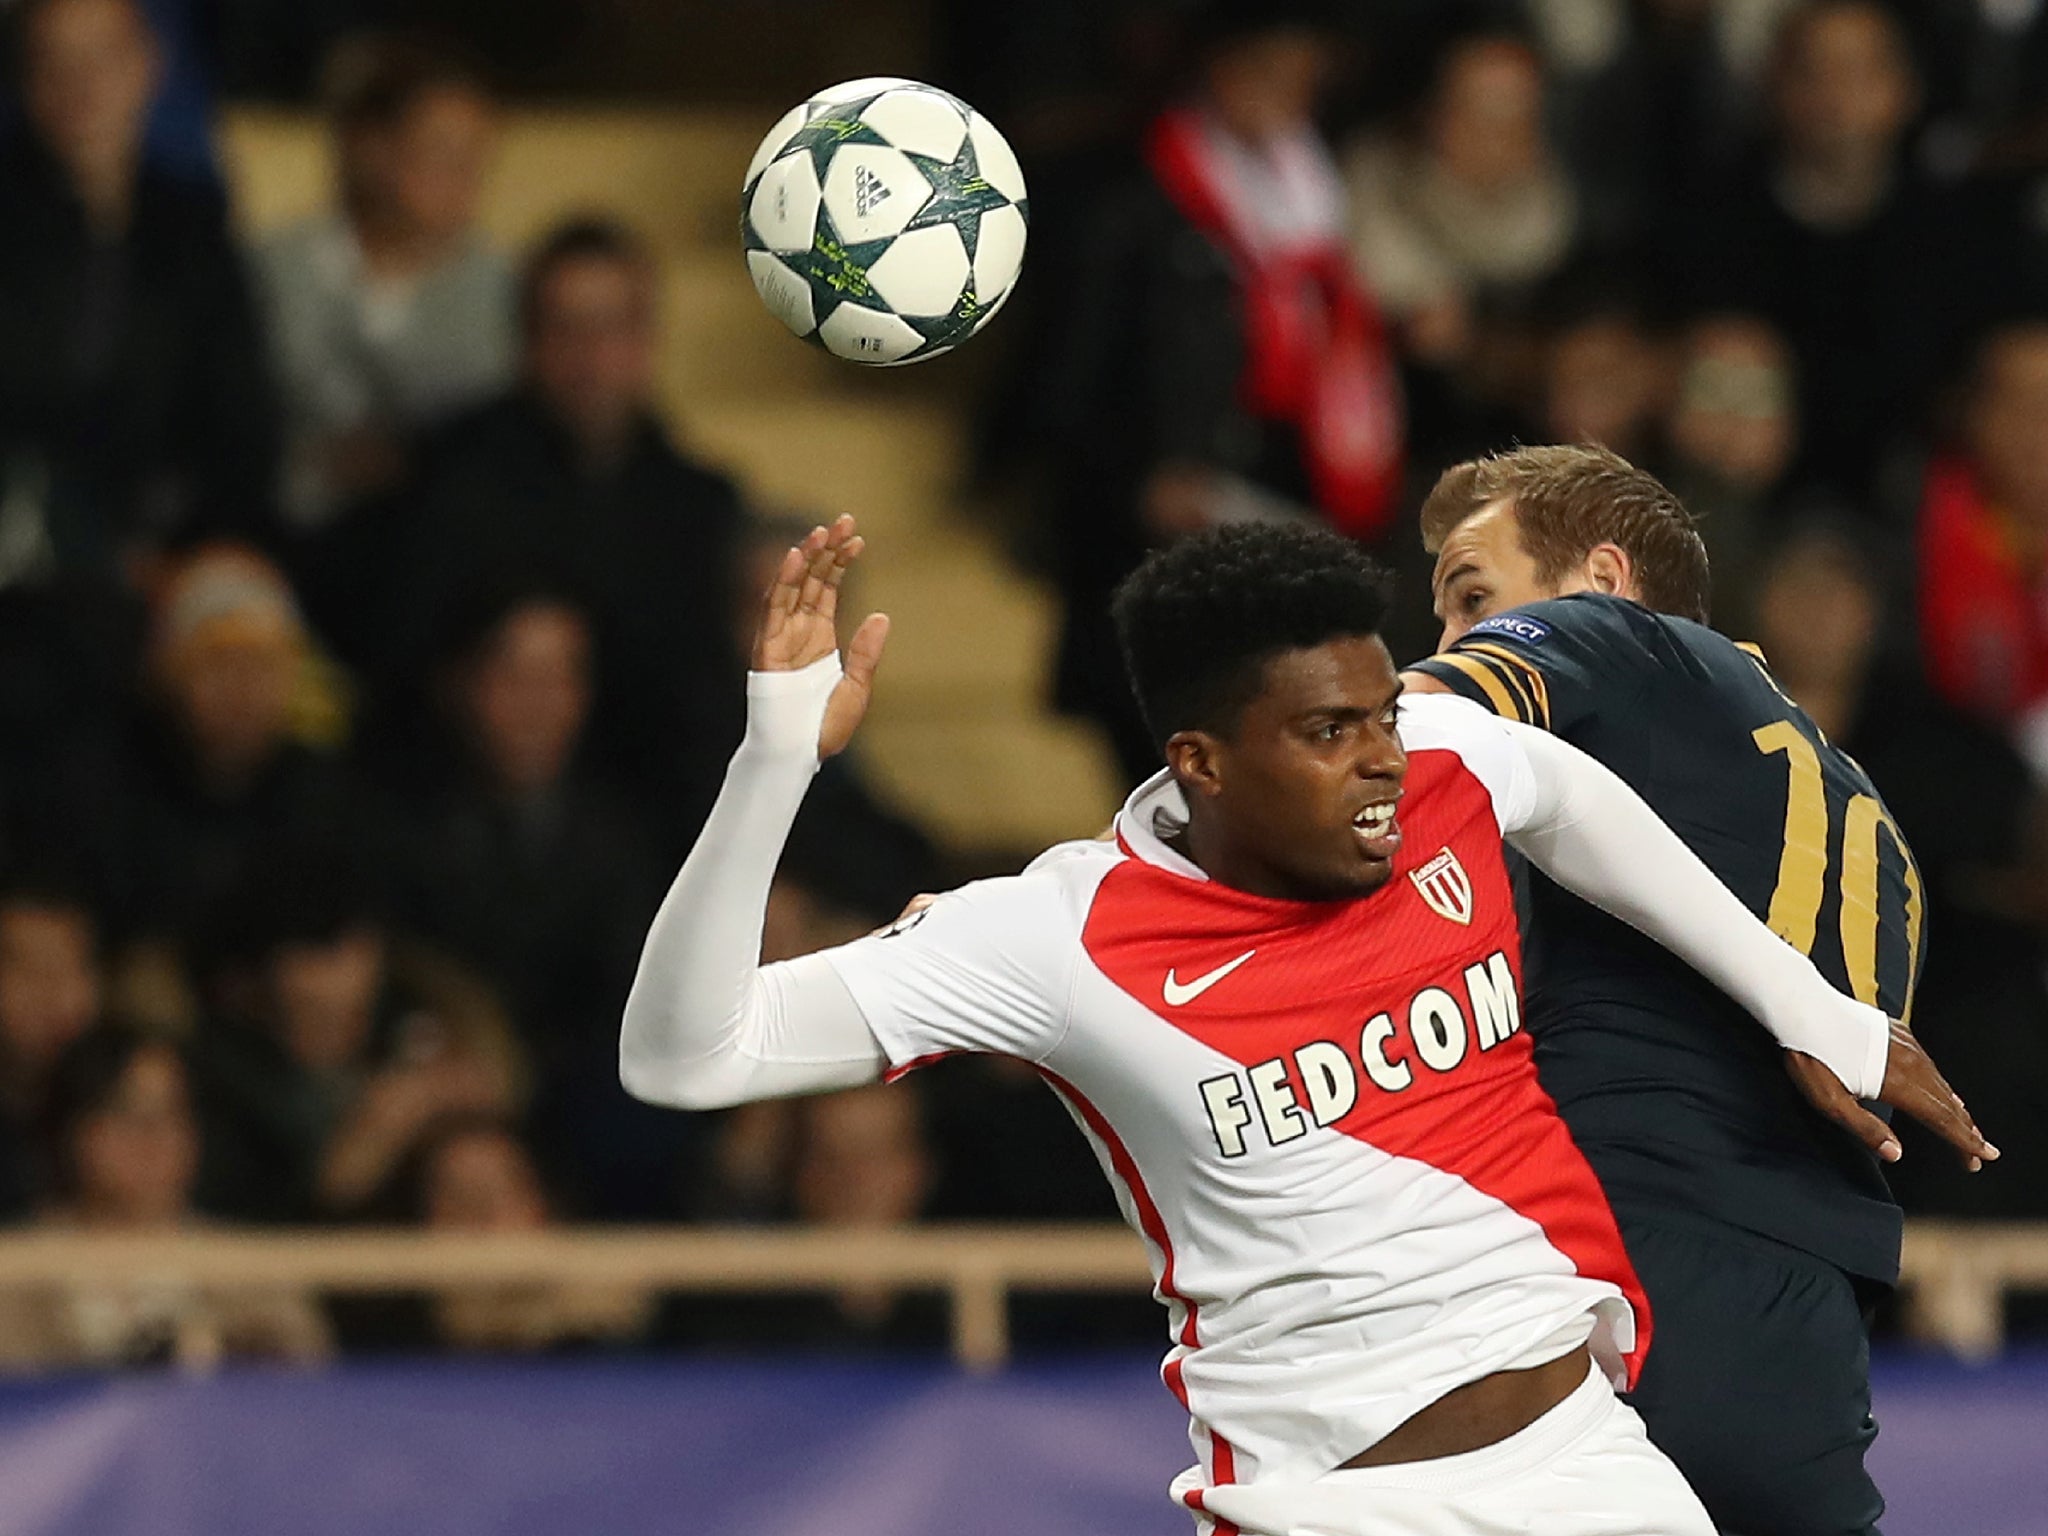 Monaco's Jemerson contests an aerial ball with Kane